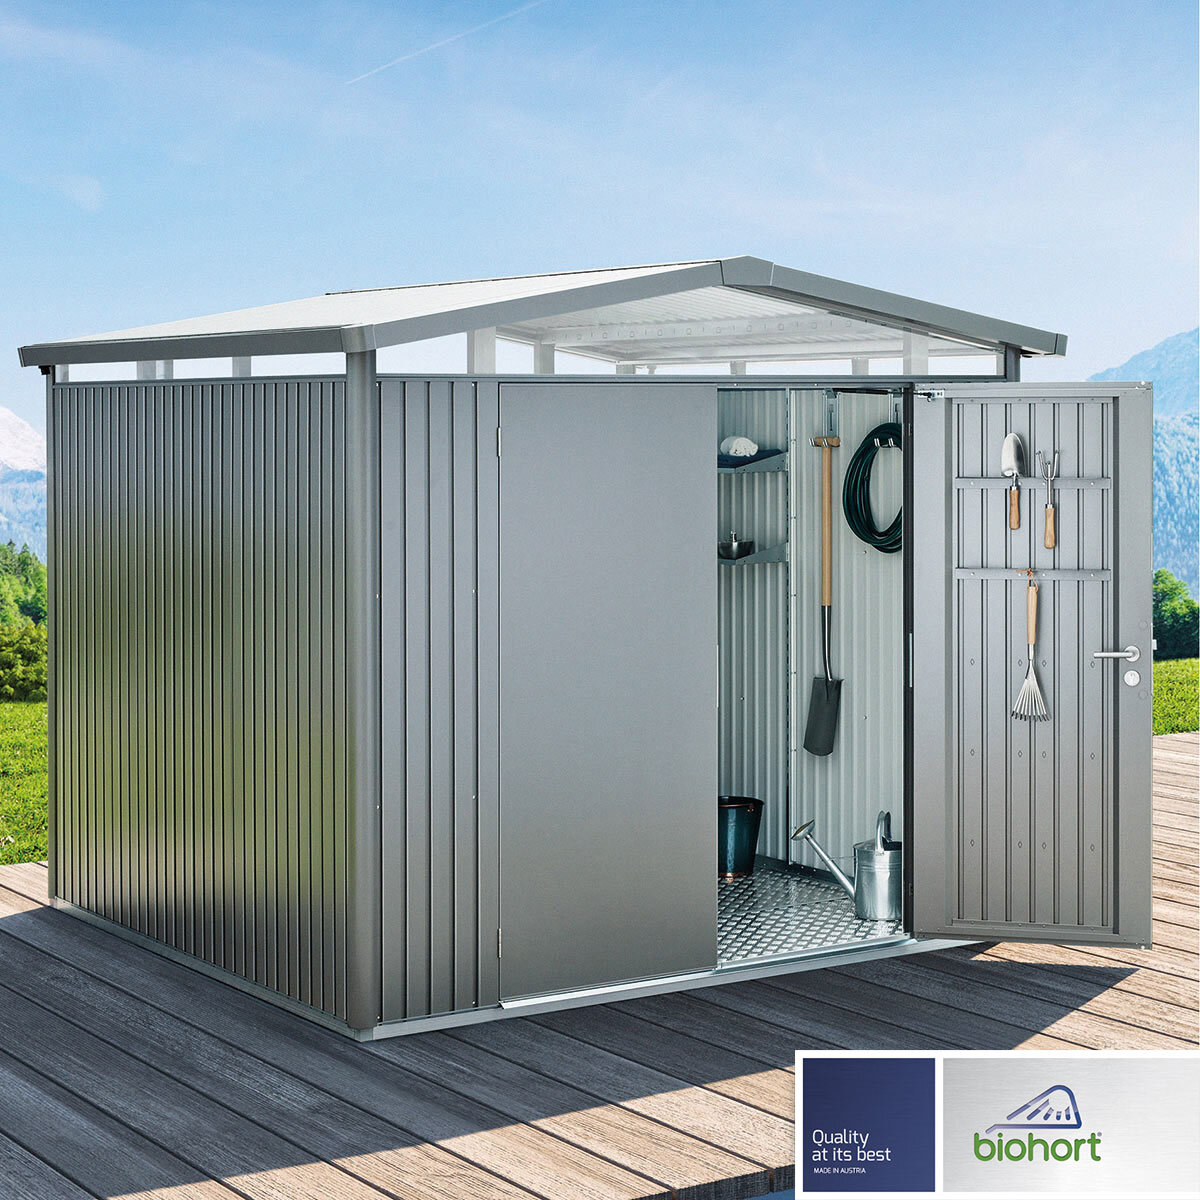 Biohort Panorama P2 9ft x 6ft 5" (2.7 x 2m) Double Door Steel Shed in 2 Colours